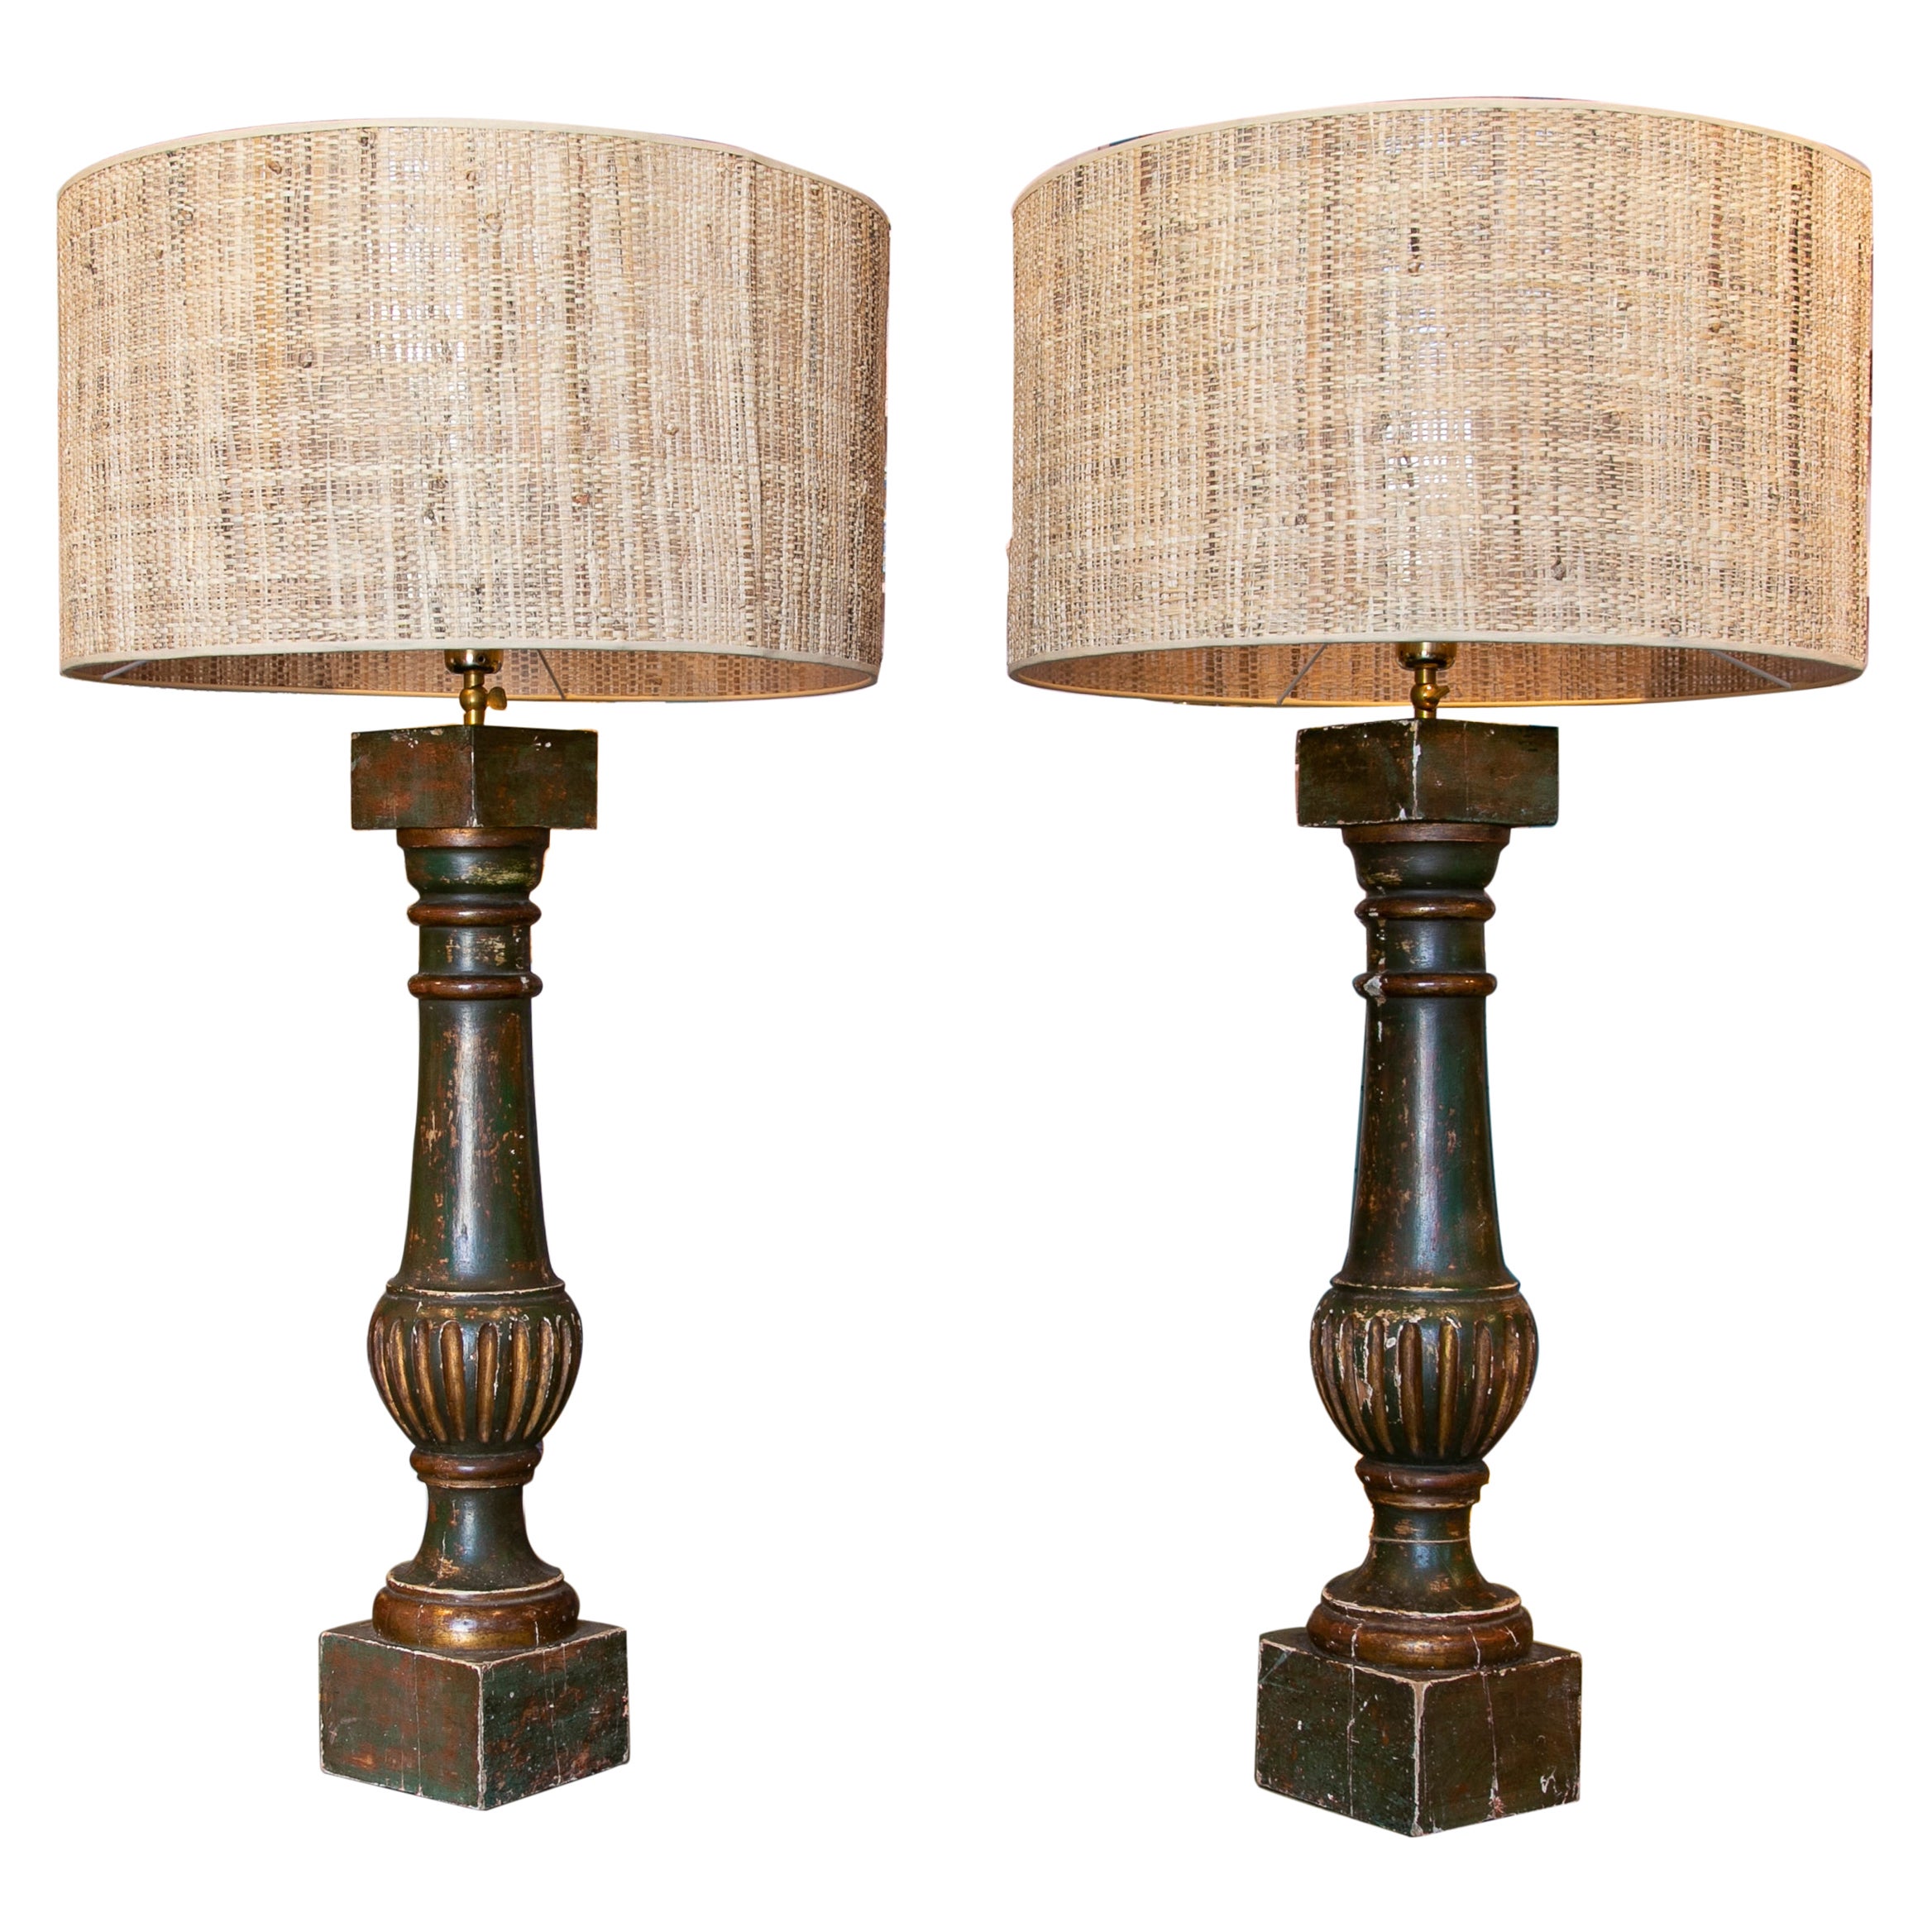 19th Century, Pair of Wooden Baluster Lamps Polychromed in Green For Sale